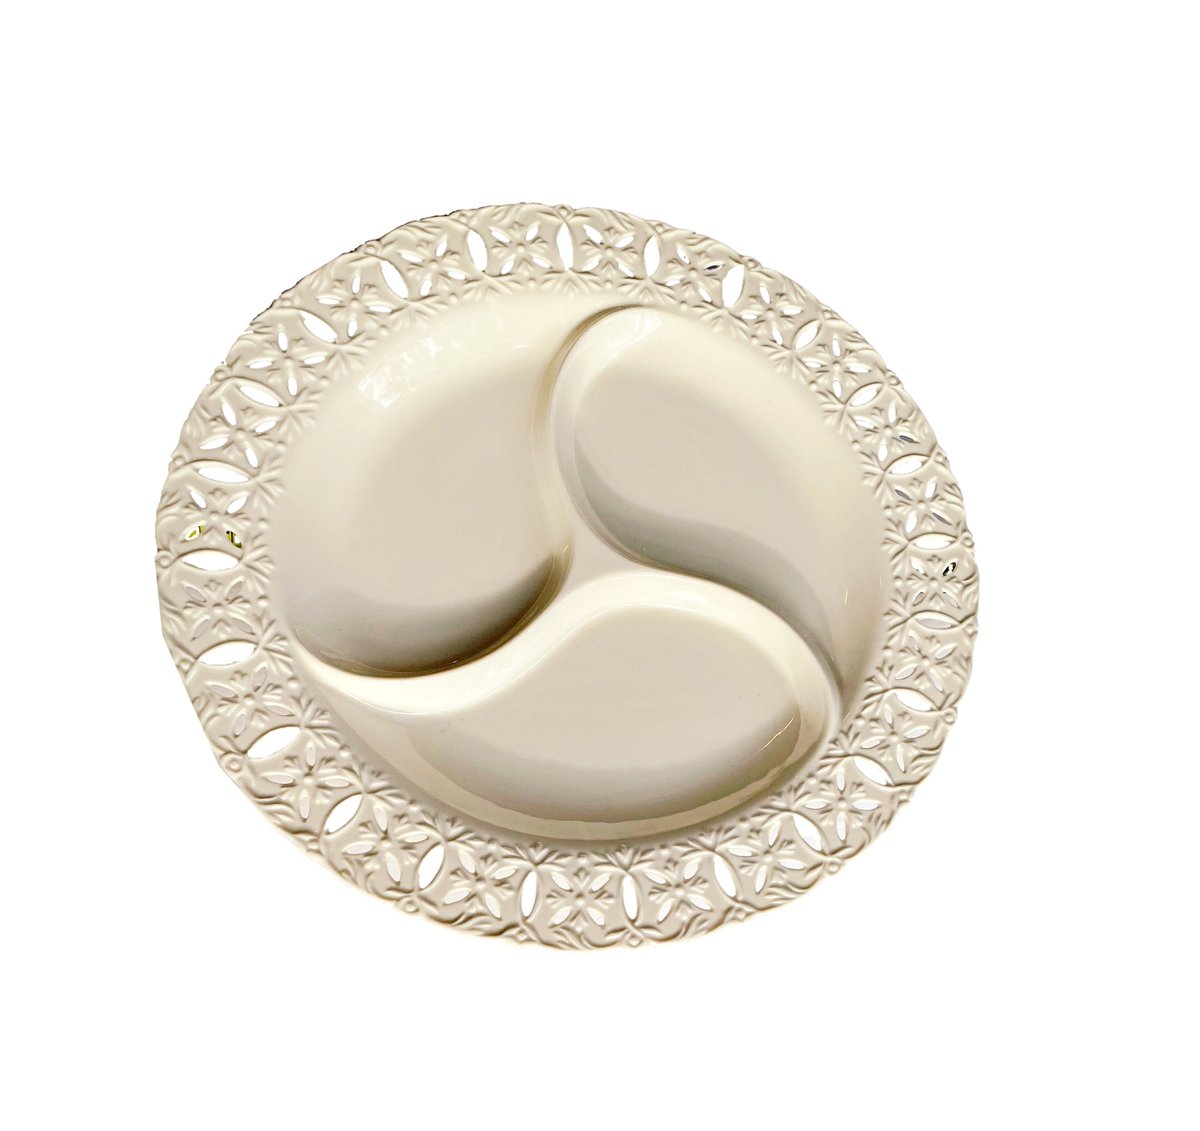 Excited to share the latest addition to my #etsy shop: Ceramic Dish 3 Part Serving Part Round Cutwork Edges Off White Essential Divided Plate For Snacks Nuts etsy.me/3BmYmR9 #housewarming #beige #christmas #white #ceramic #handmadedish #vintagerelishdish #3part